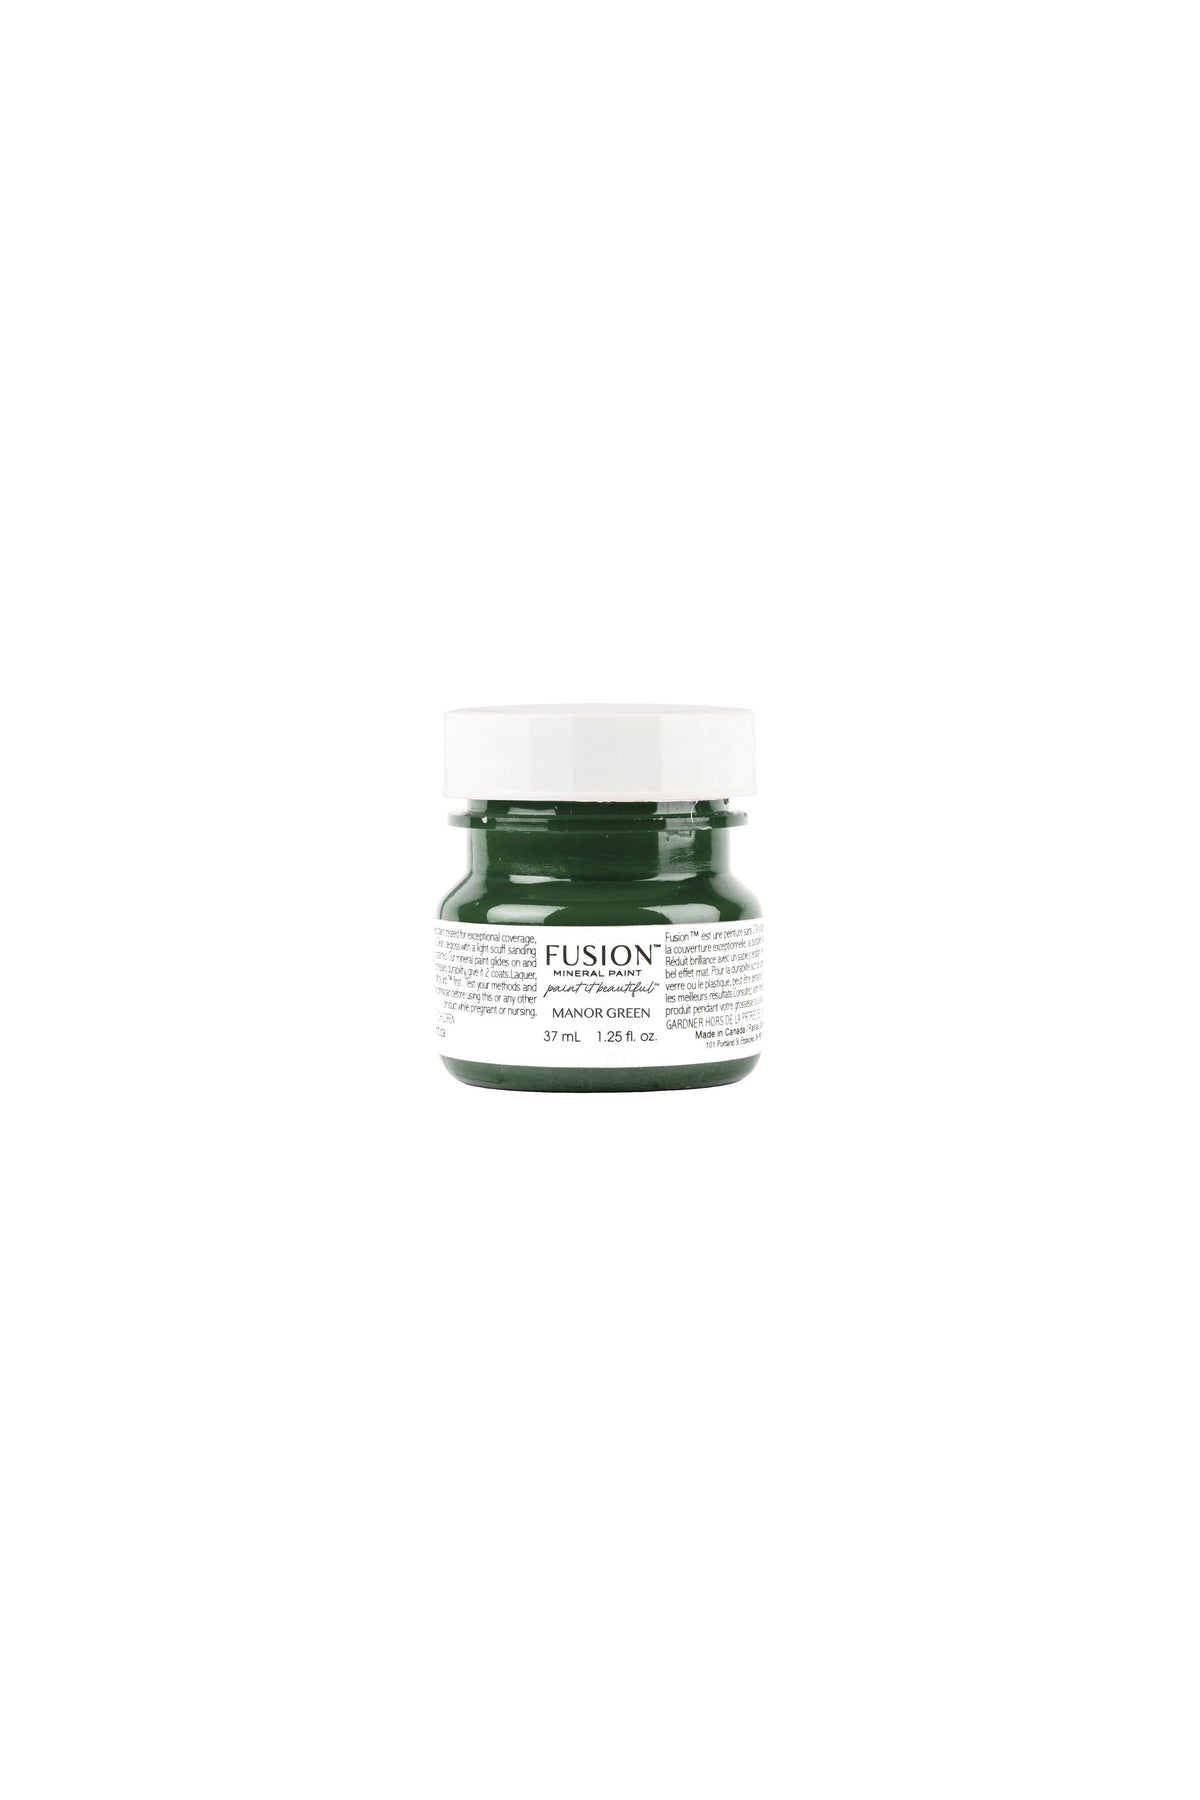 Manor Green-Fusion Mineral Paint